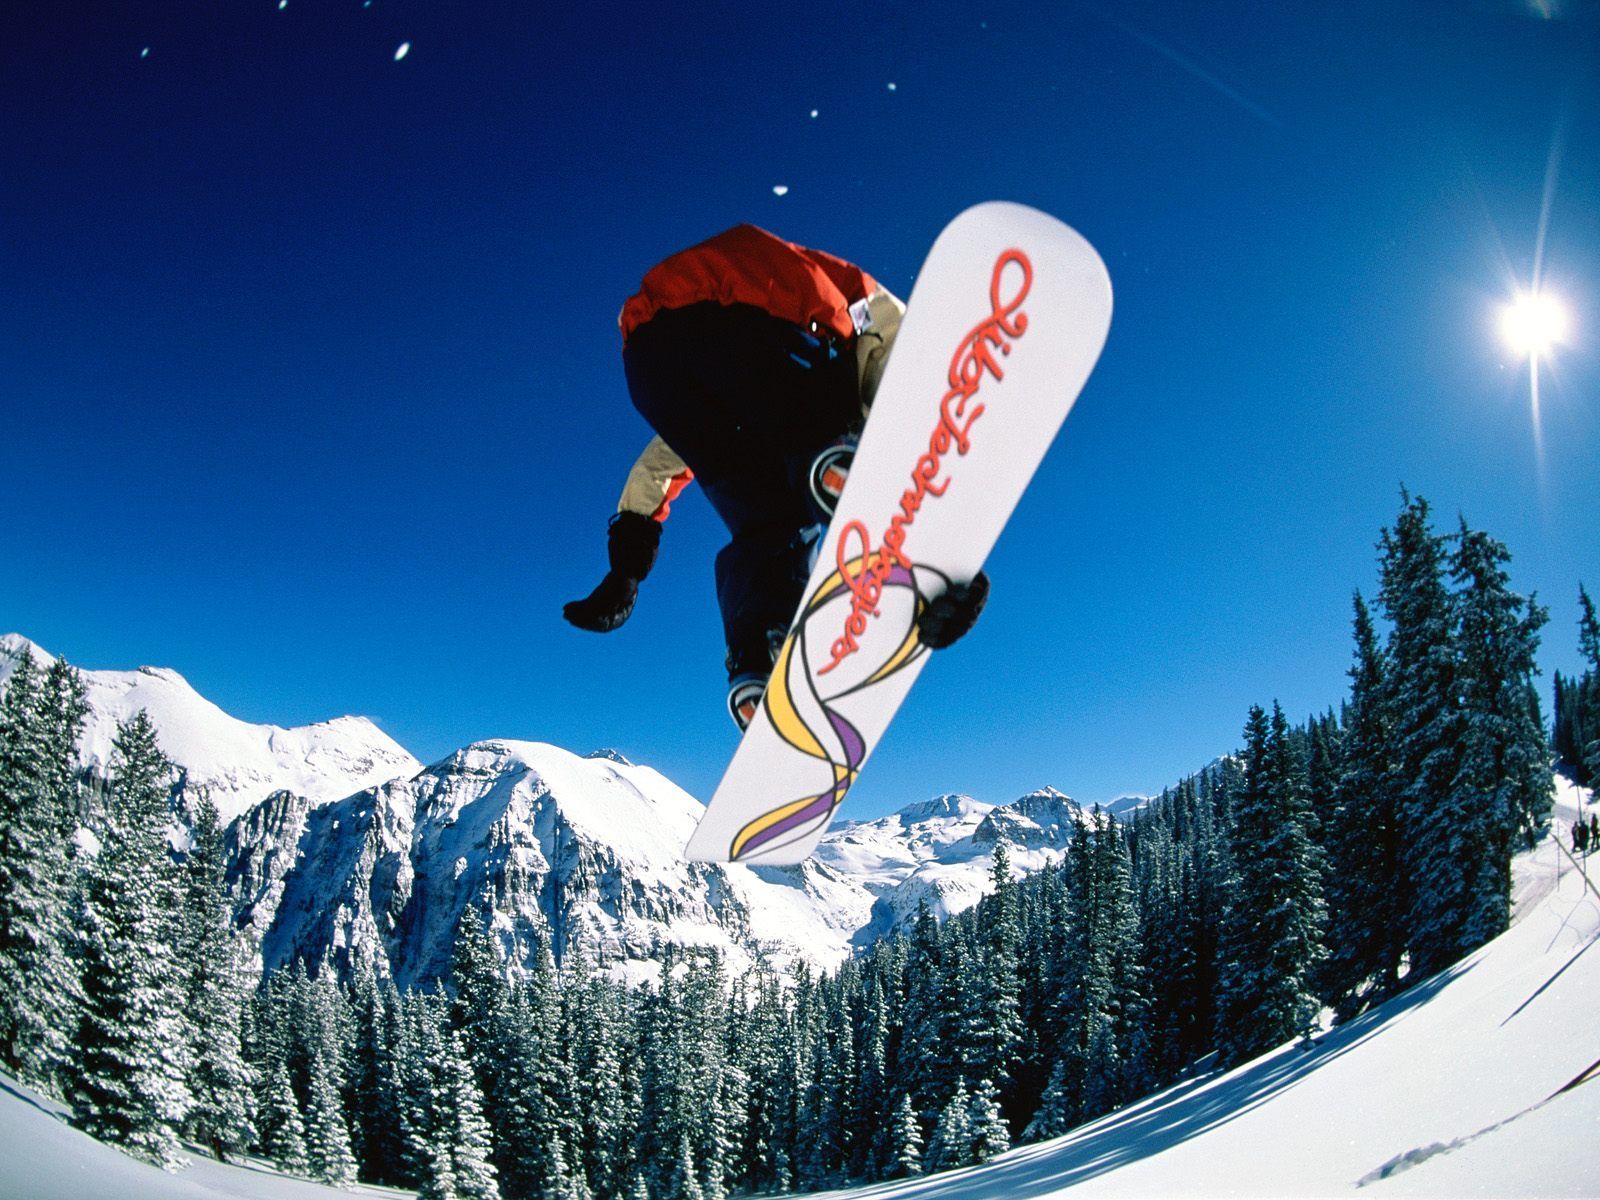 Snowboard | Free Desktop Wallpapers for HD, Widescreen and Mobile